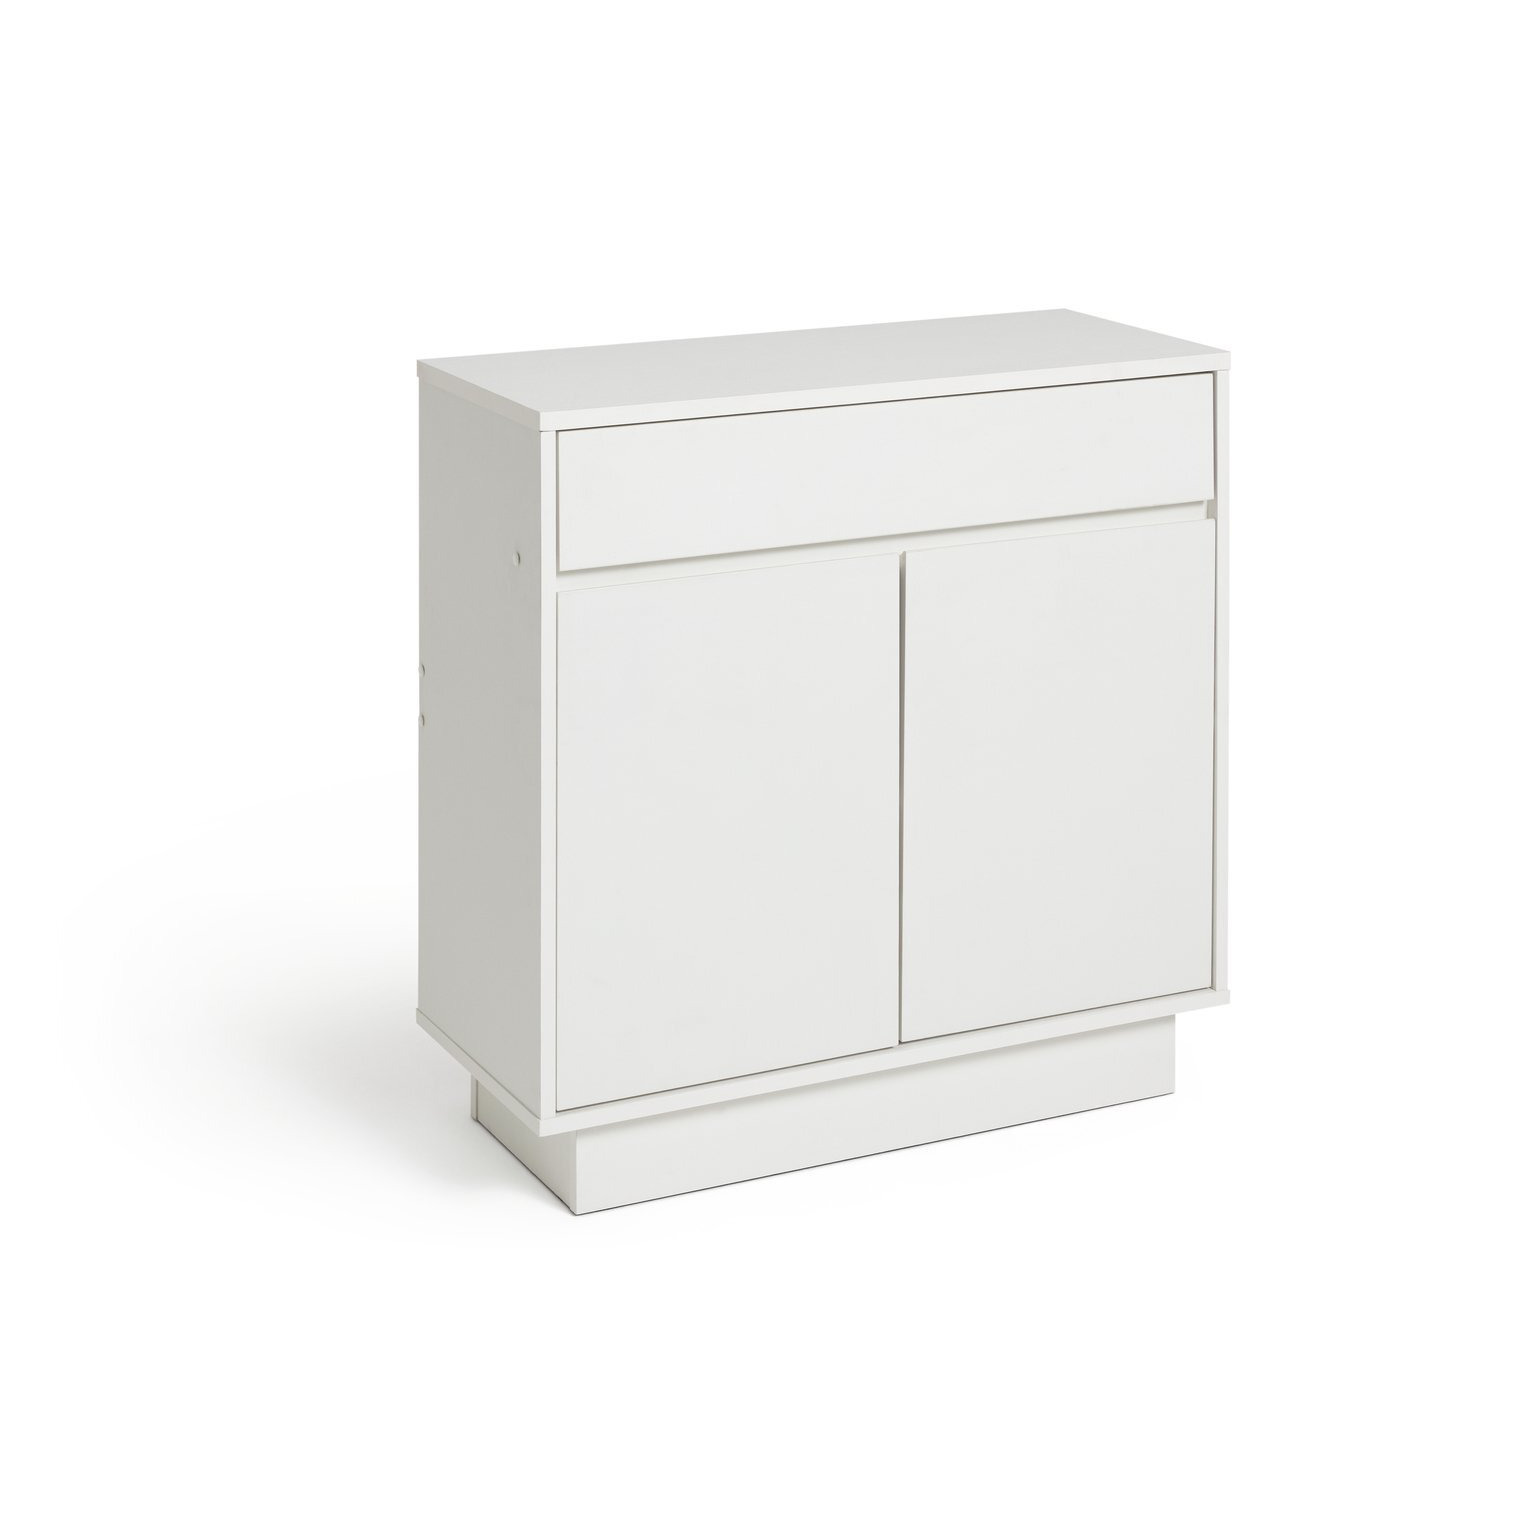 Habitat Cubes Small Sideboard - White